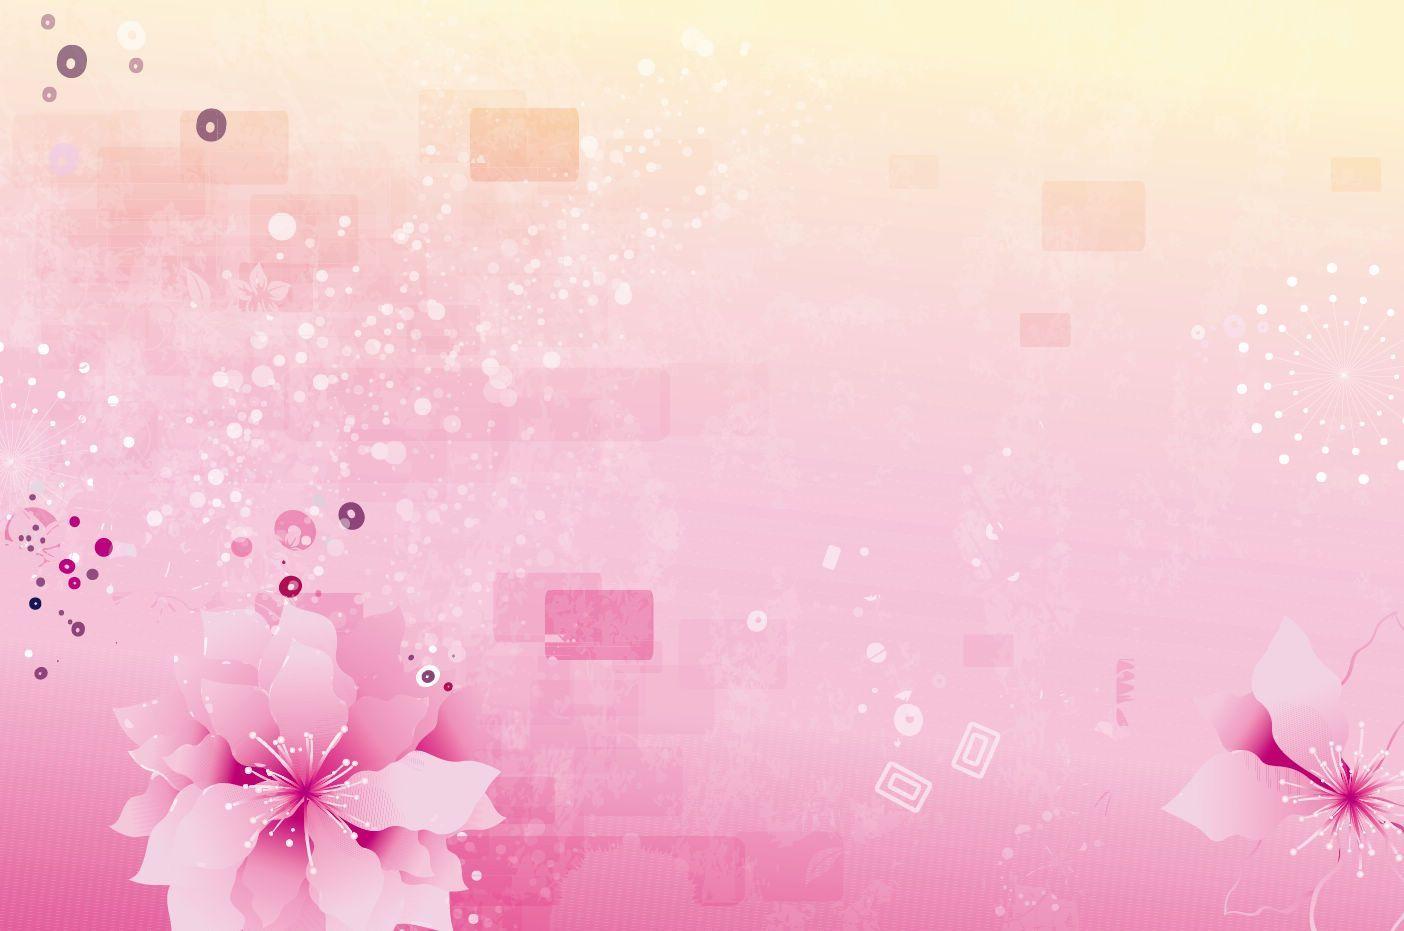 Flowers of Pink Powerpoint of Pink Download image